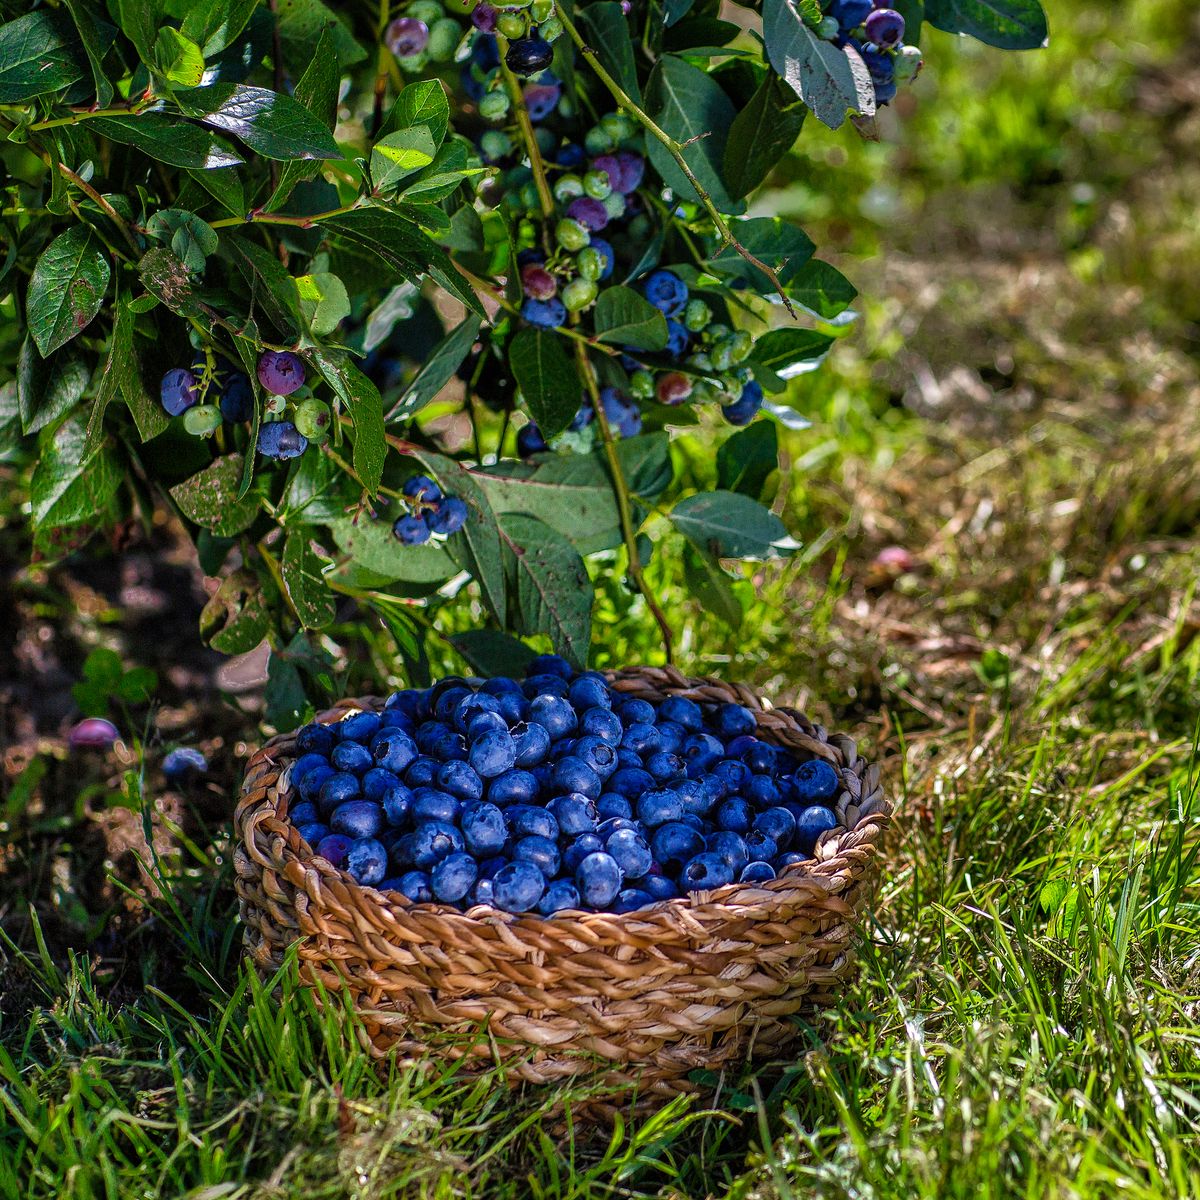 Branches,Of,Blueberries,With,Berries,And,Blueberries,In,The,Basket,